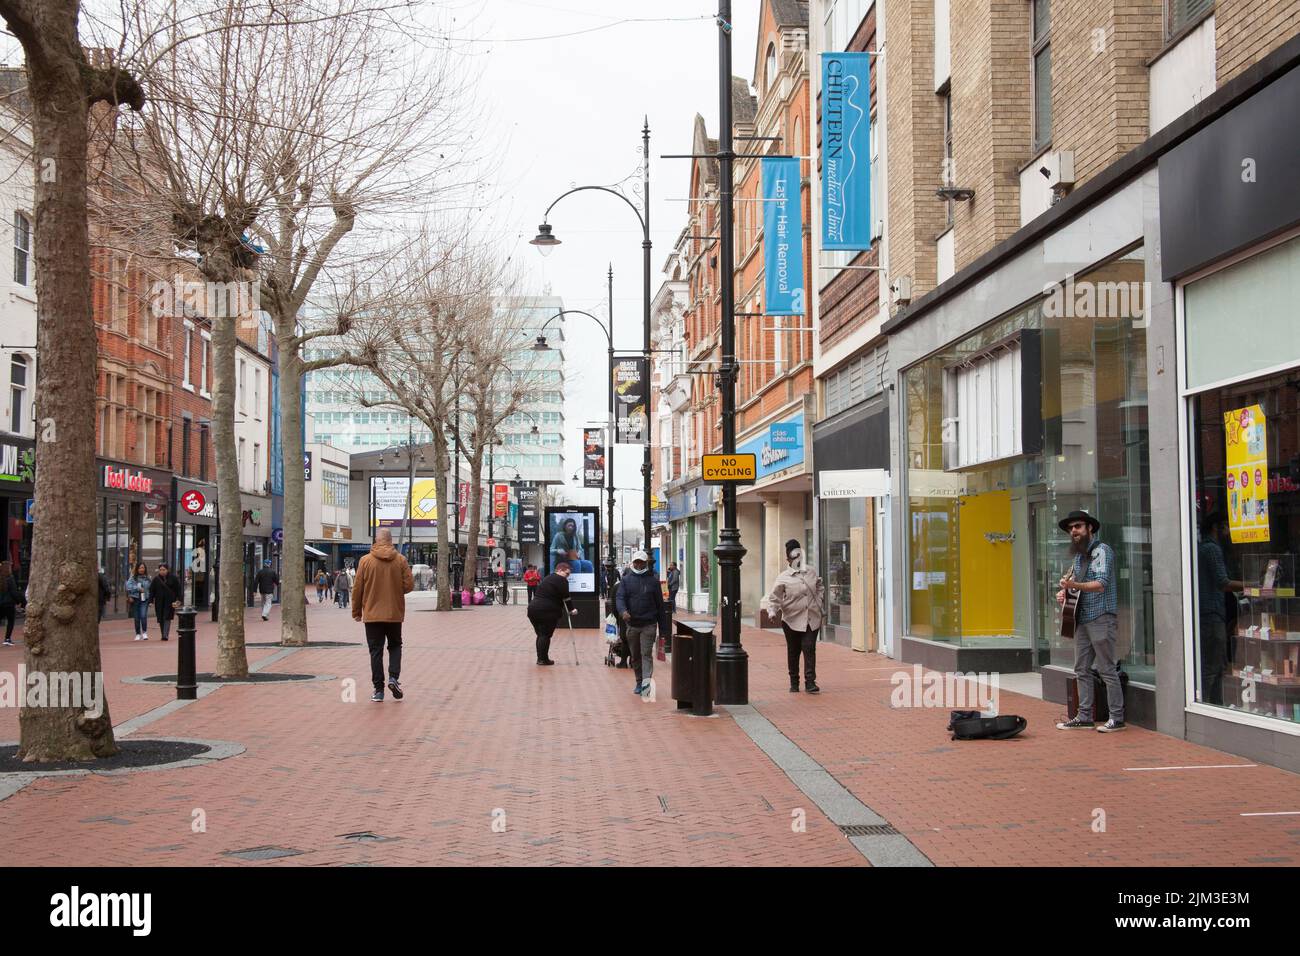 Views of Broad Street in Reading, Berkshire in the UK Stock Photo